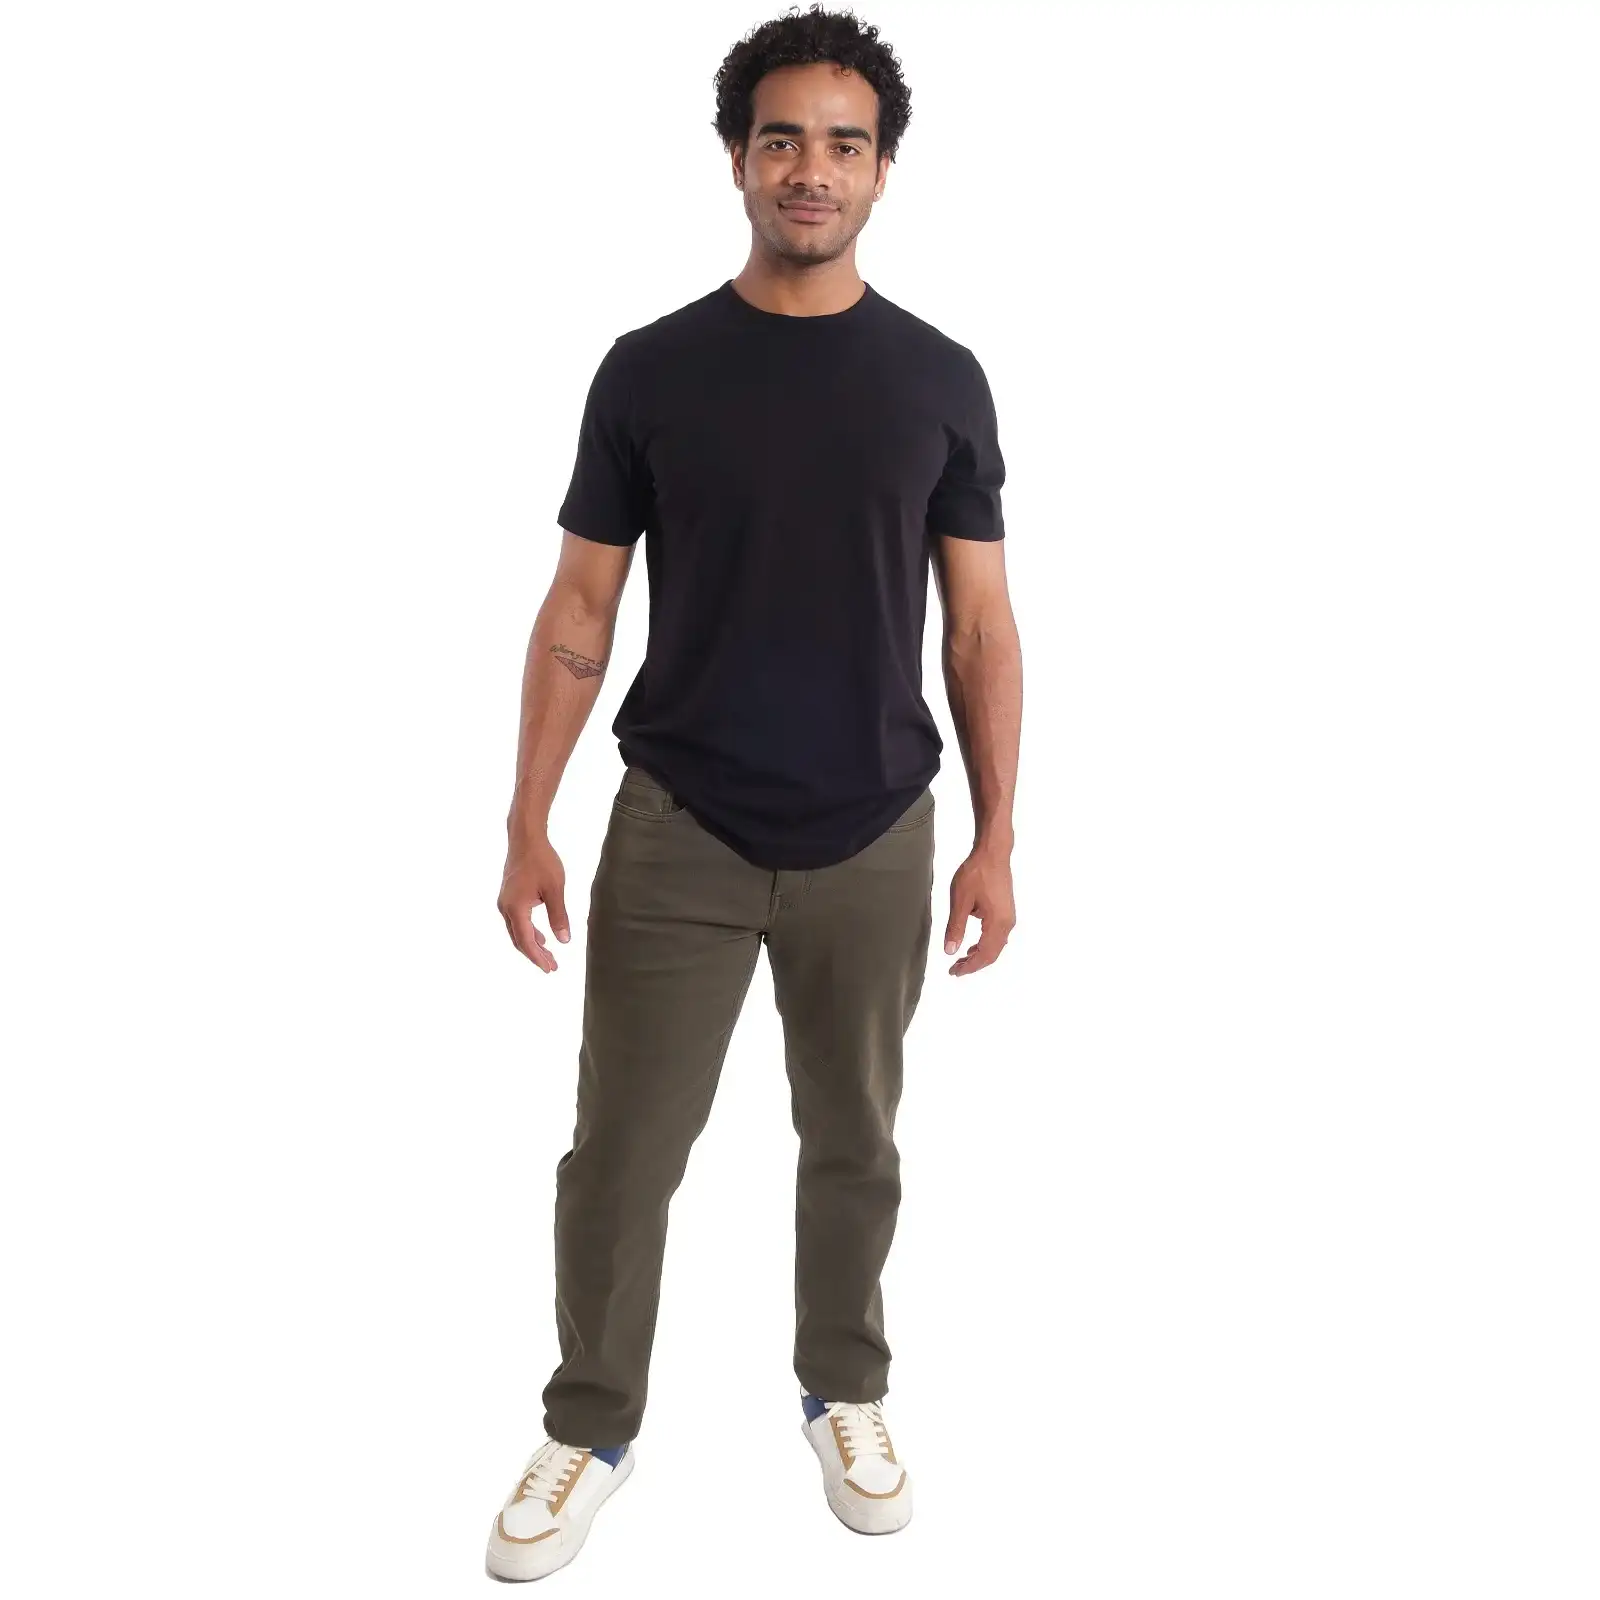 Image of Athletic Fit Denkhaki™ - Soldier (Olive)